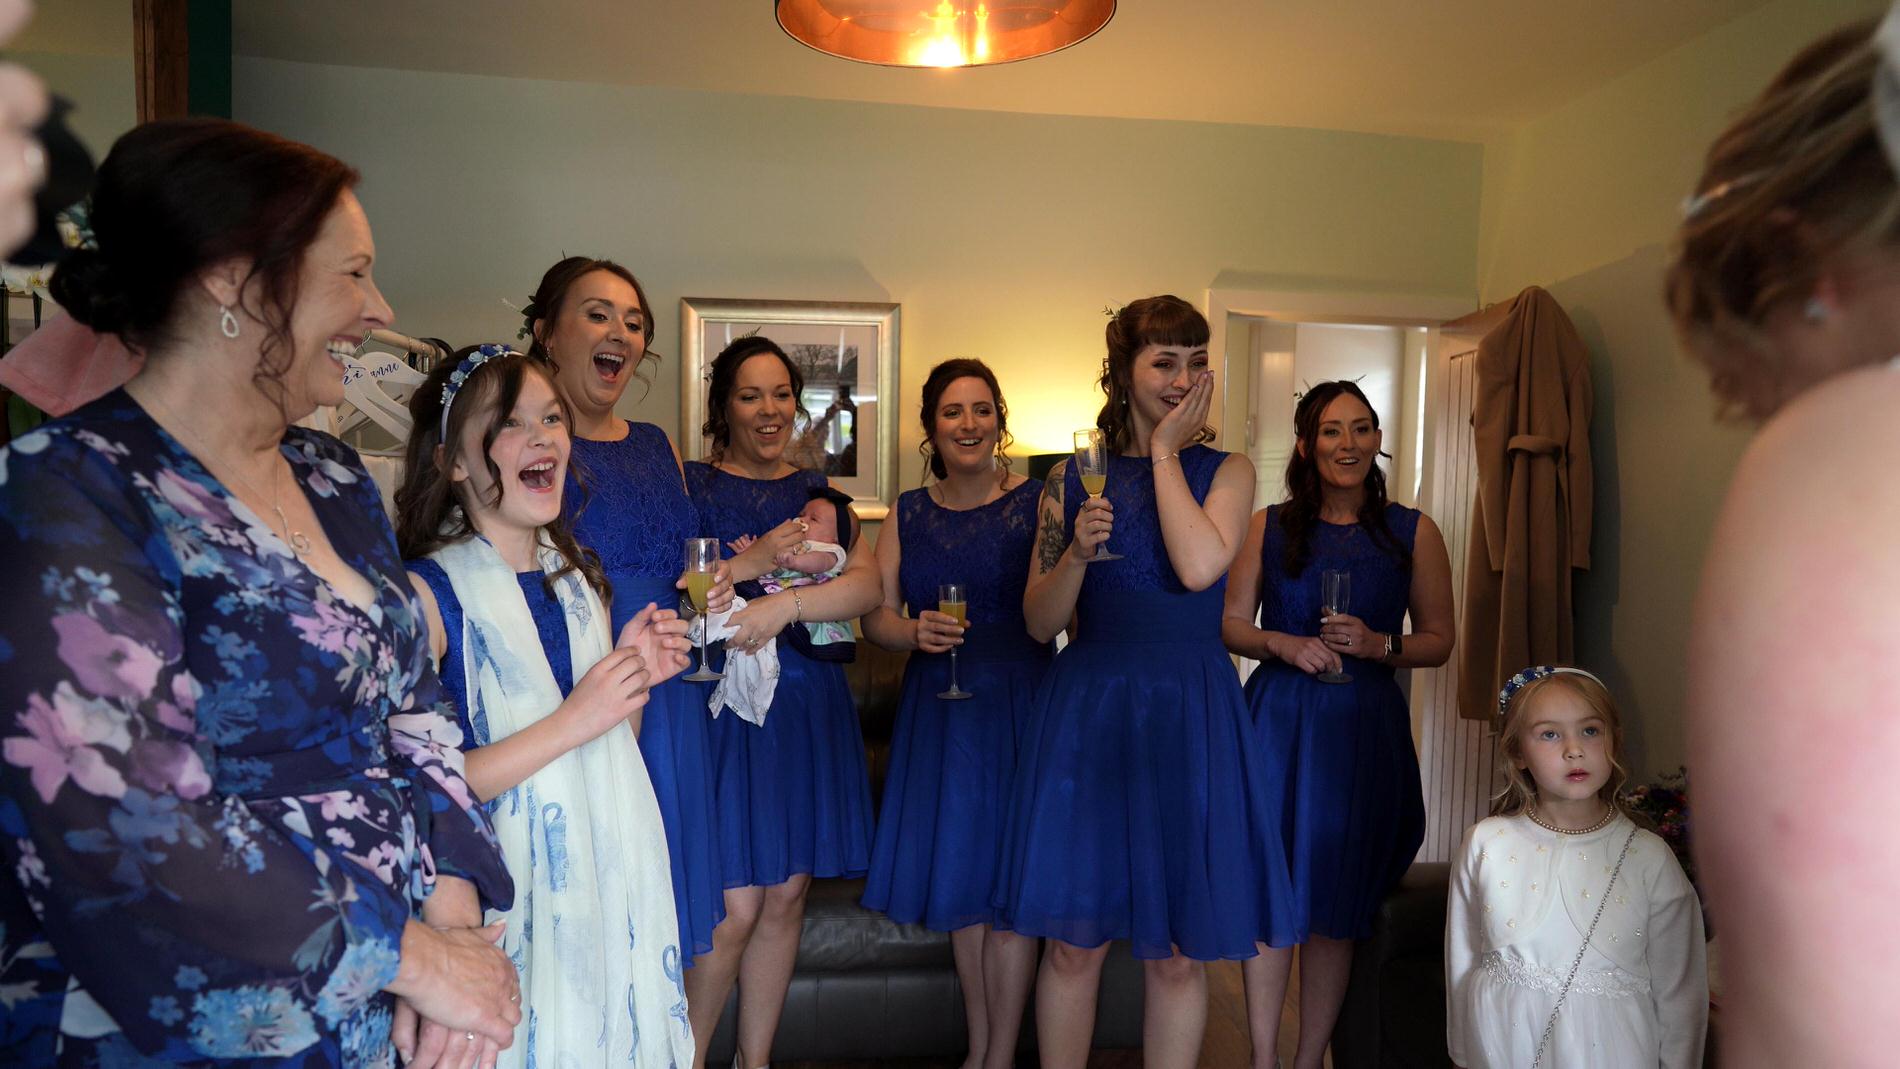 video still of bridesmaids reaction to bride in dress